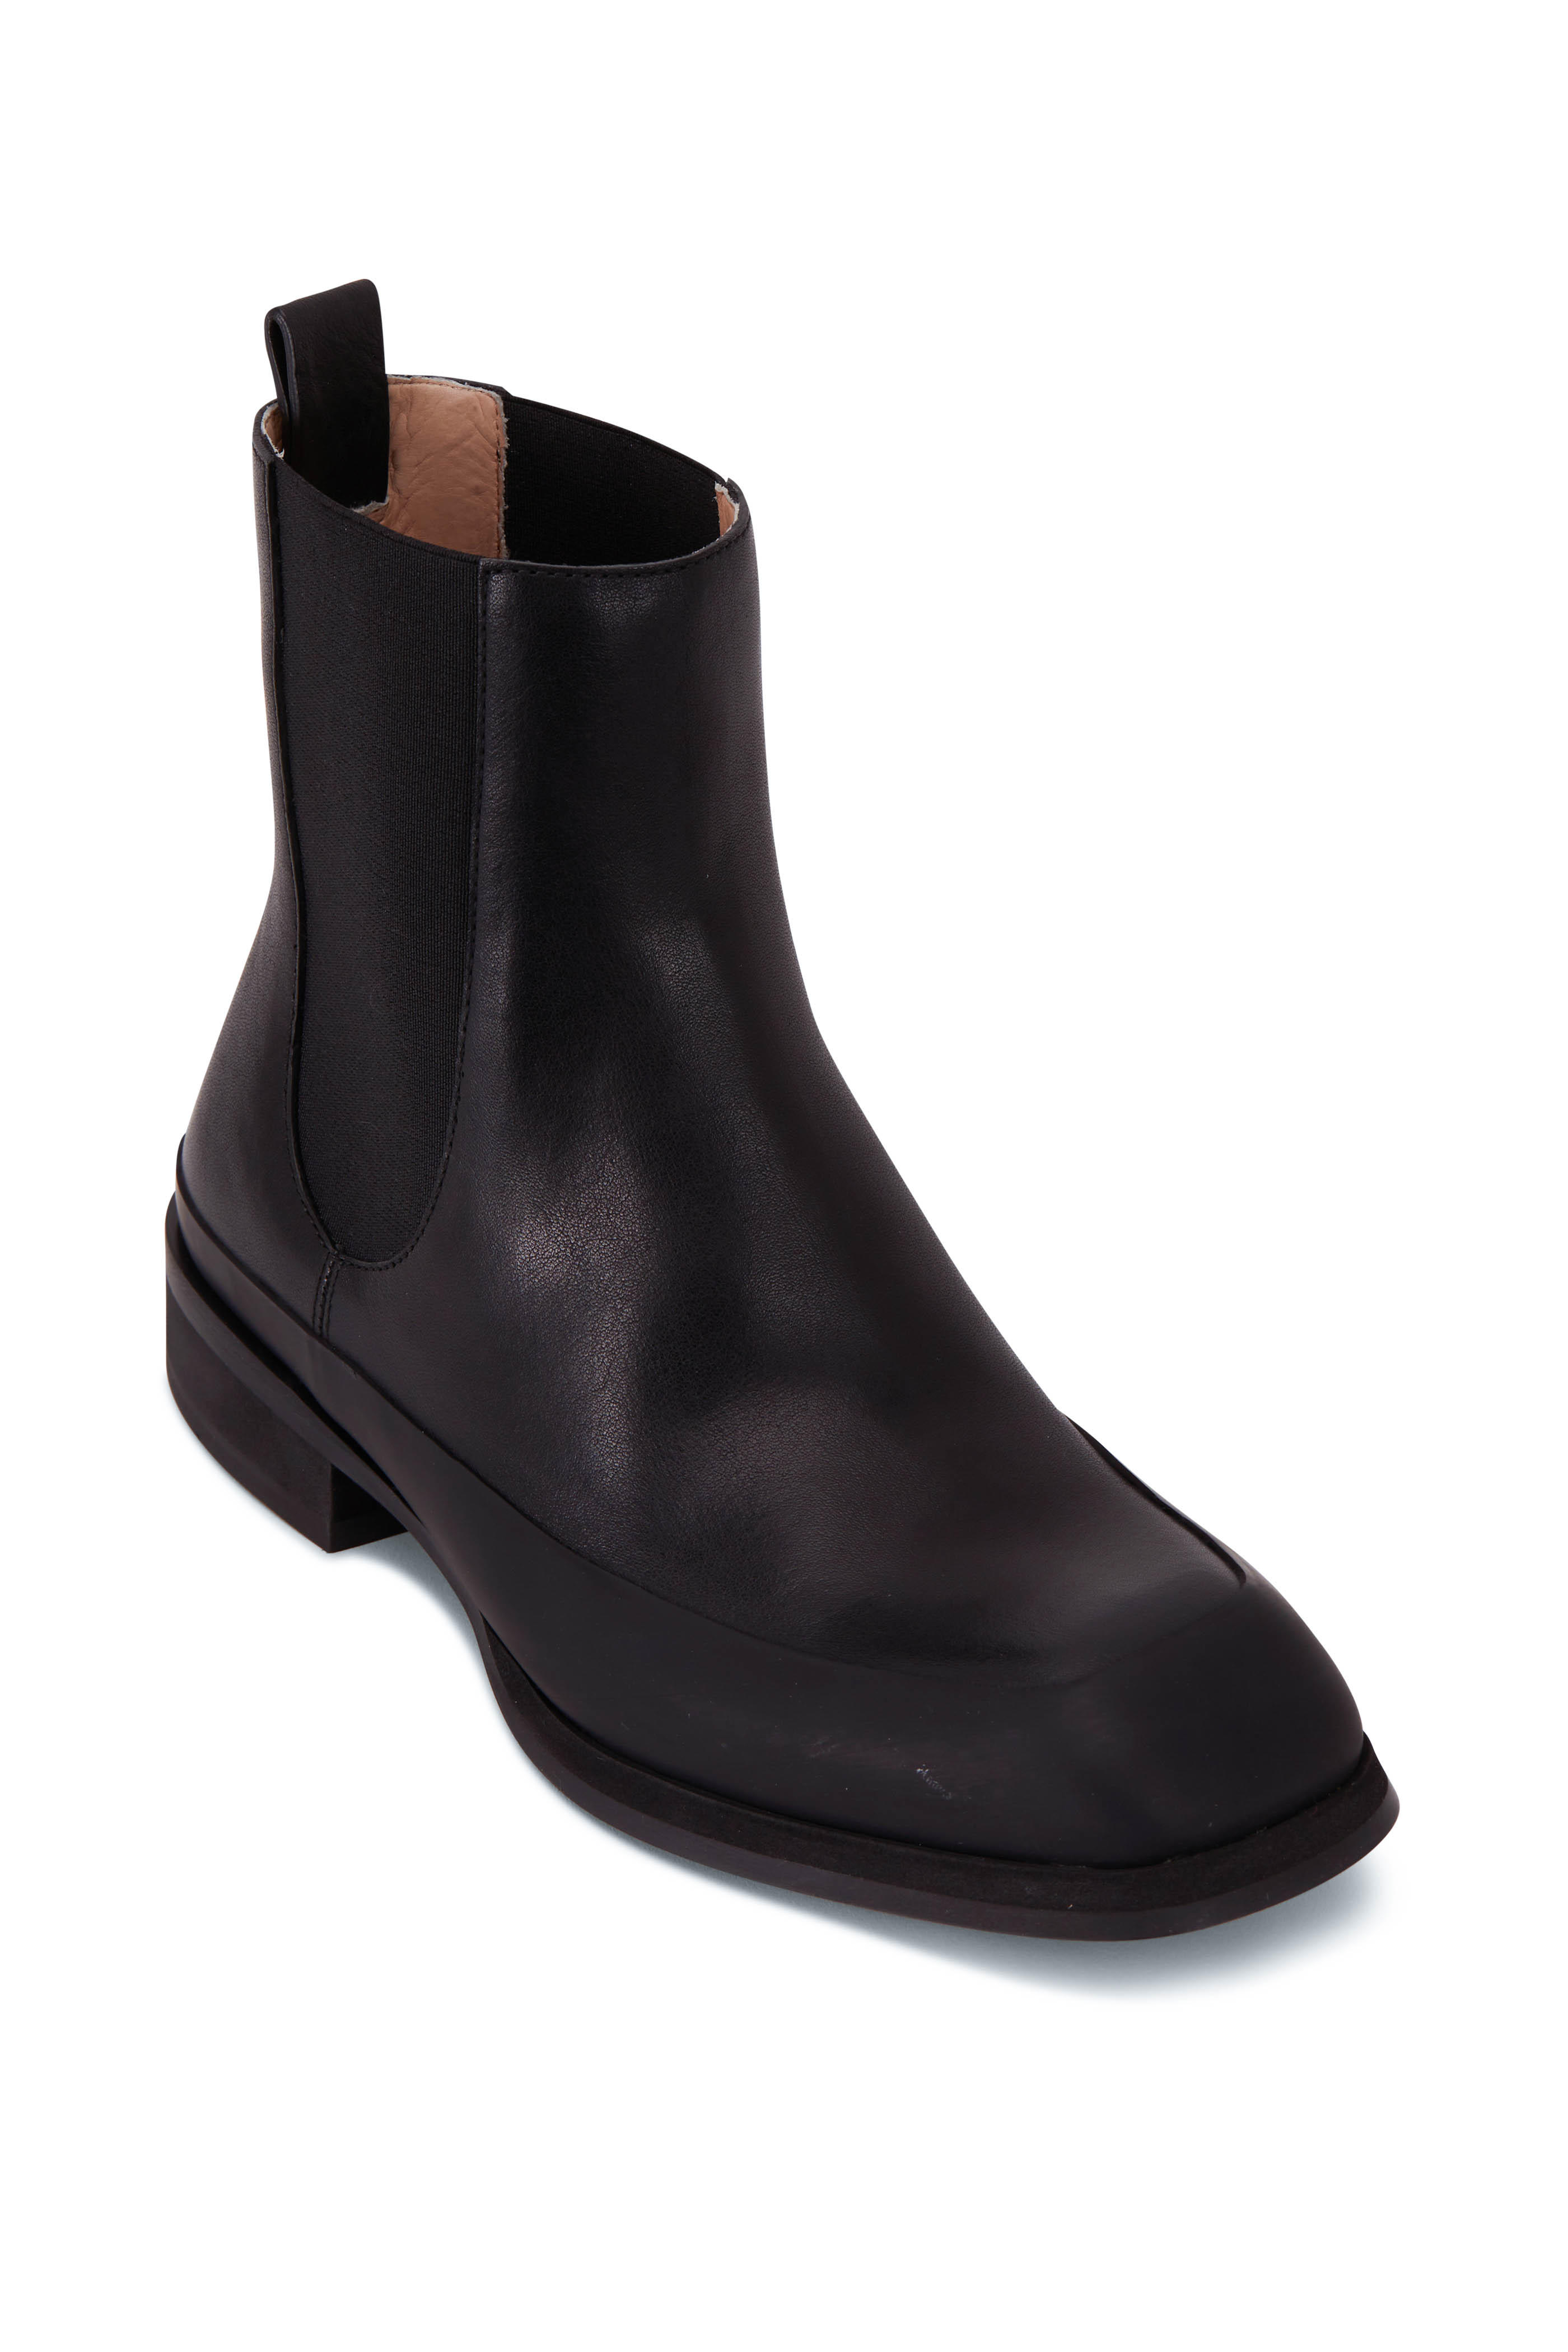 Garden Black Leather Doule Gore Boot